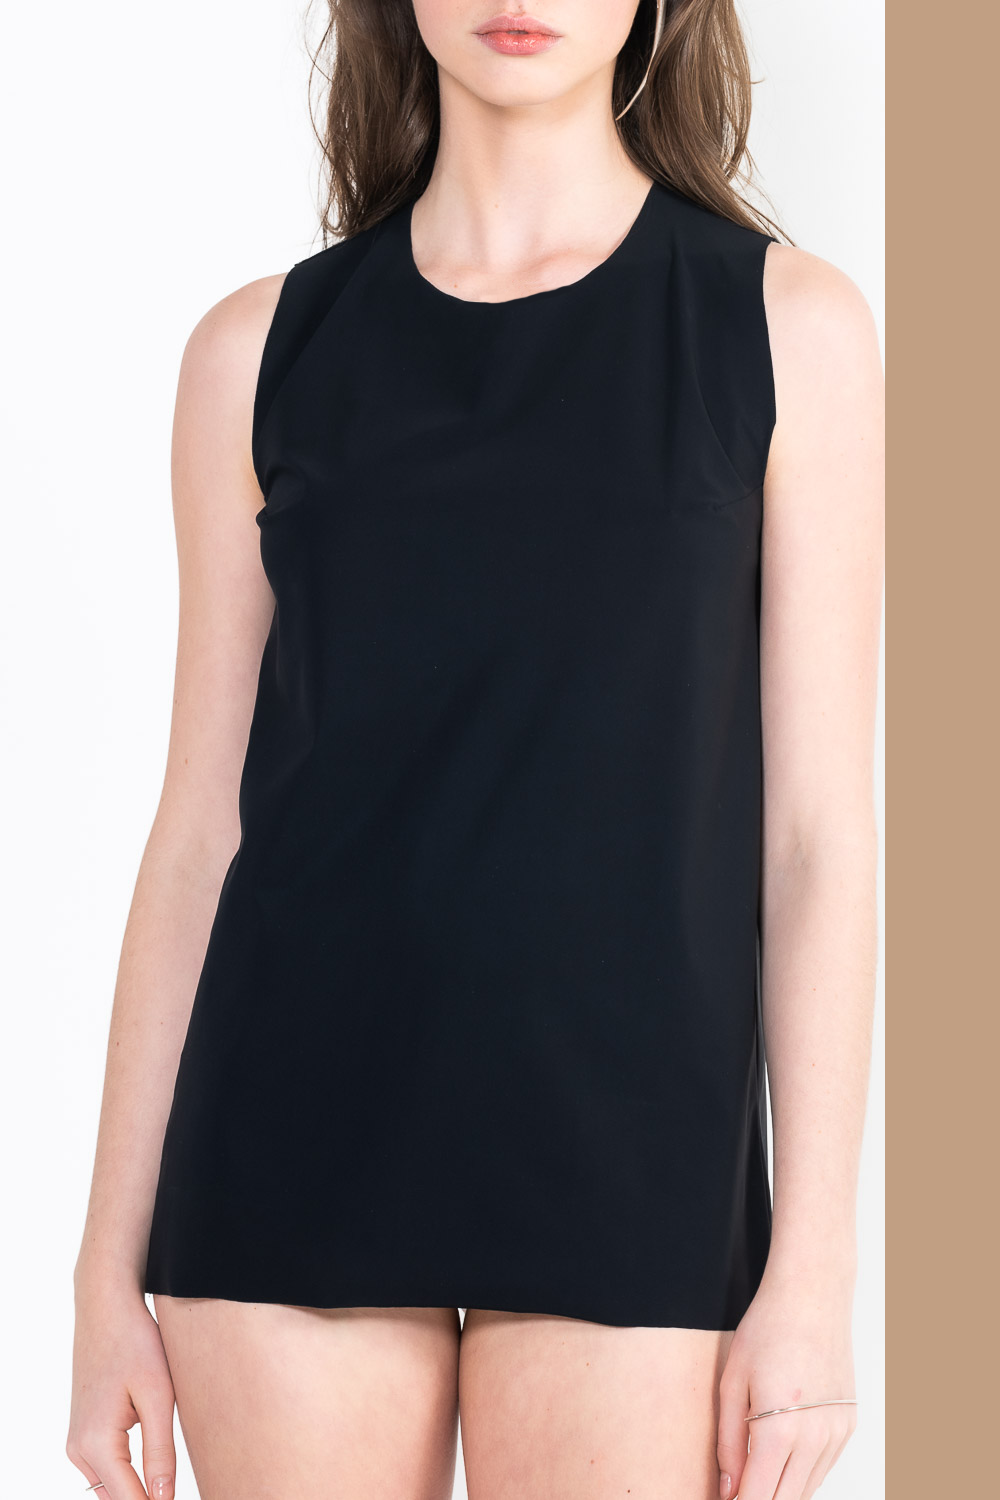 L33 Wide sleeveless top